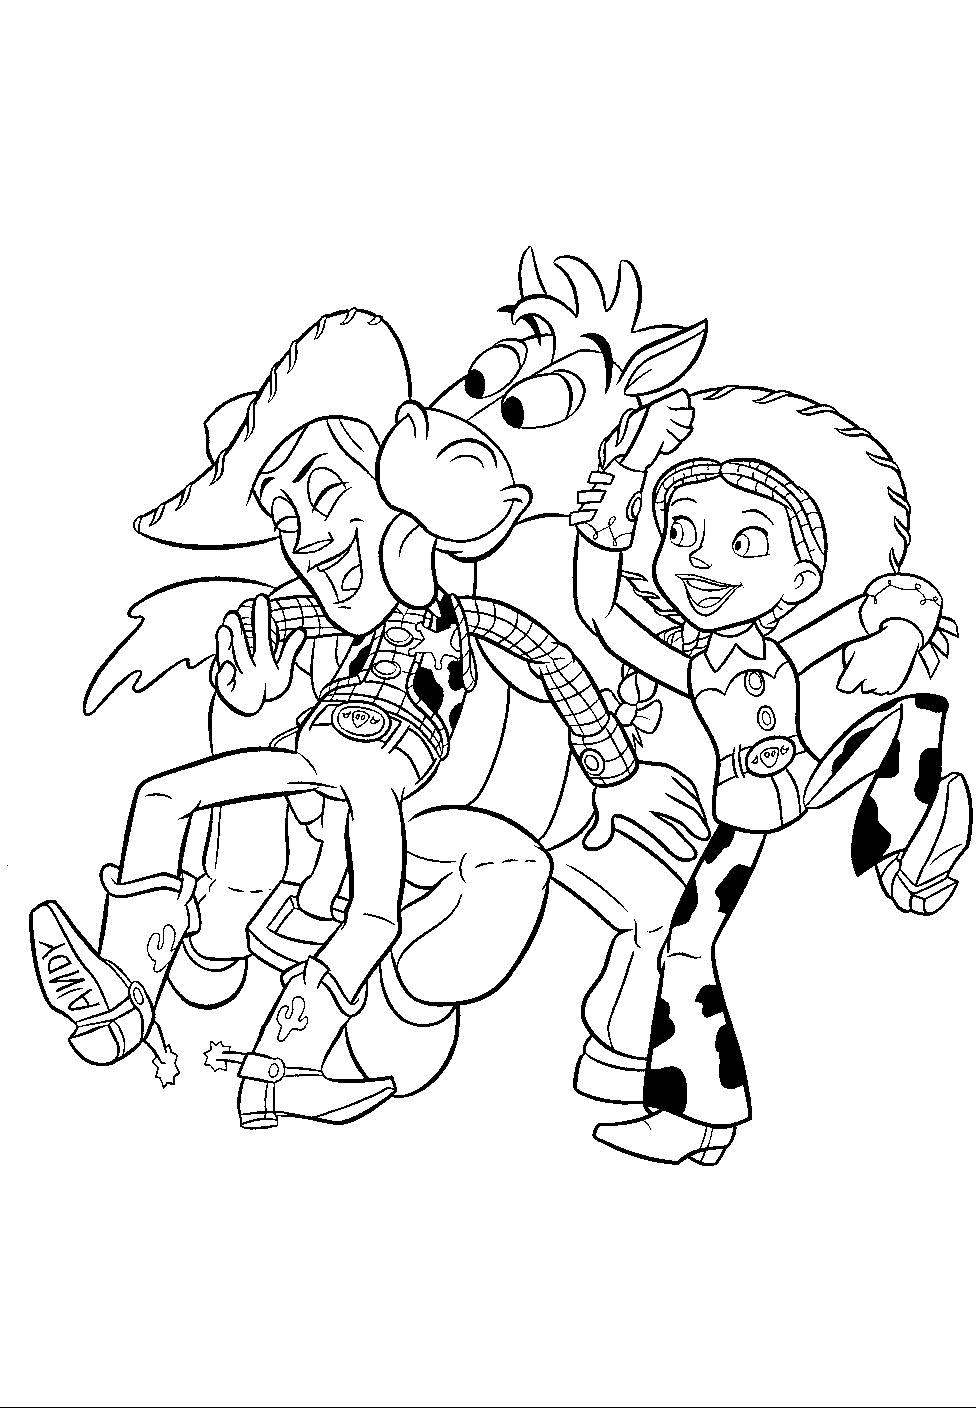 Jessie coloring pages to download and print for free